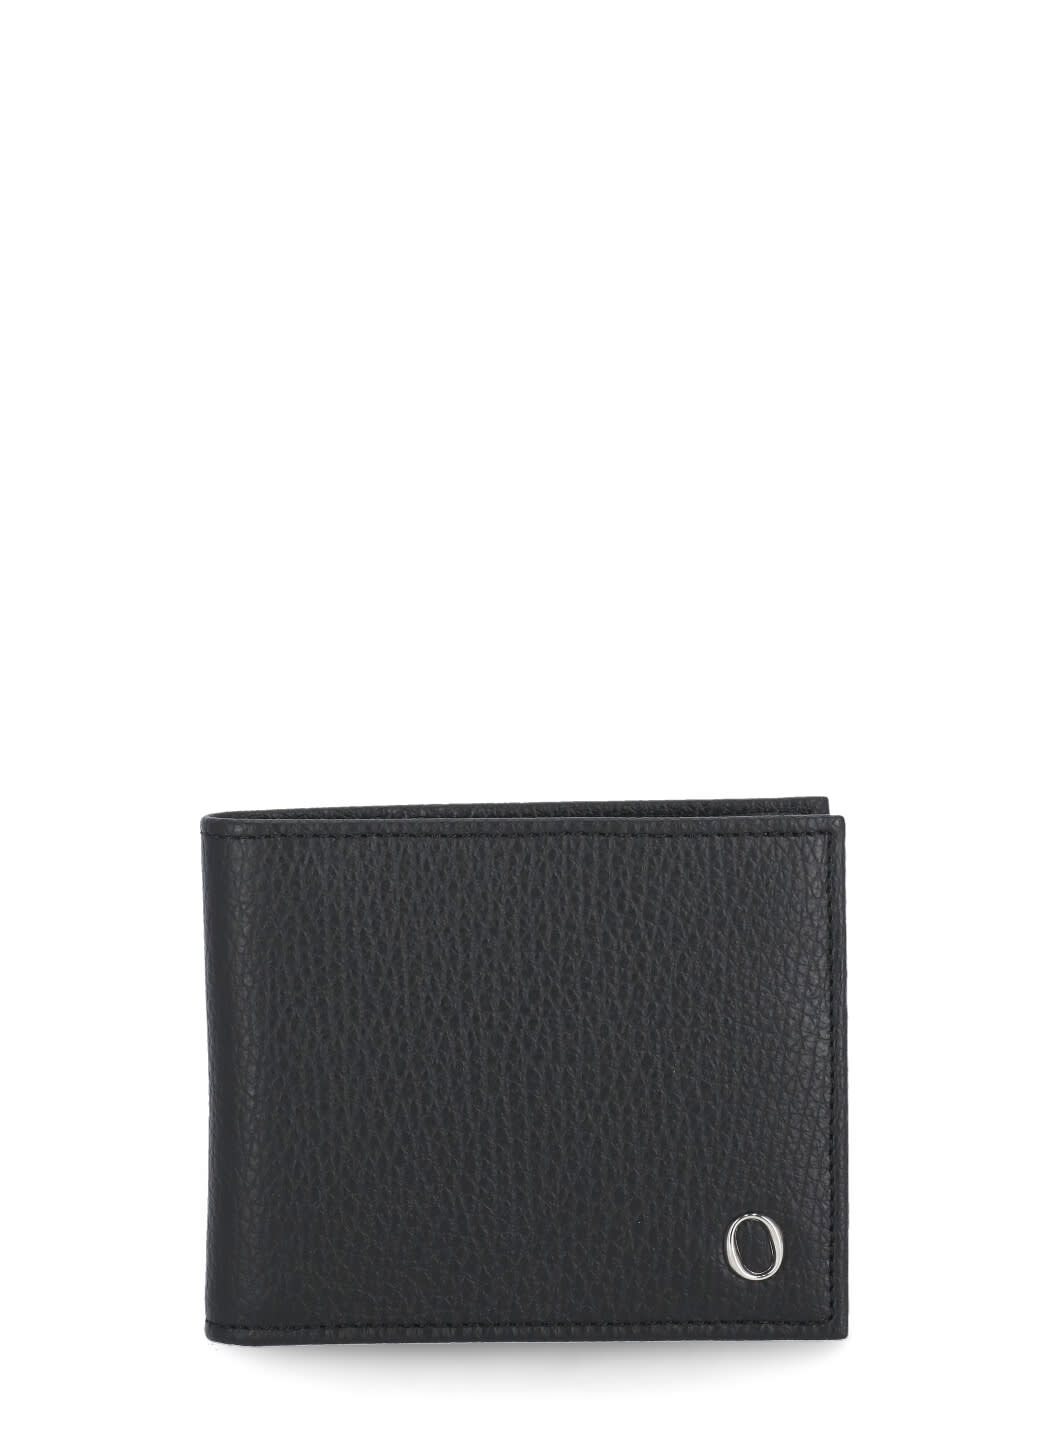 Orciani Micron Deep Wallet